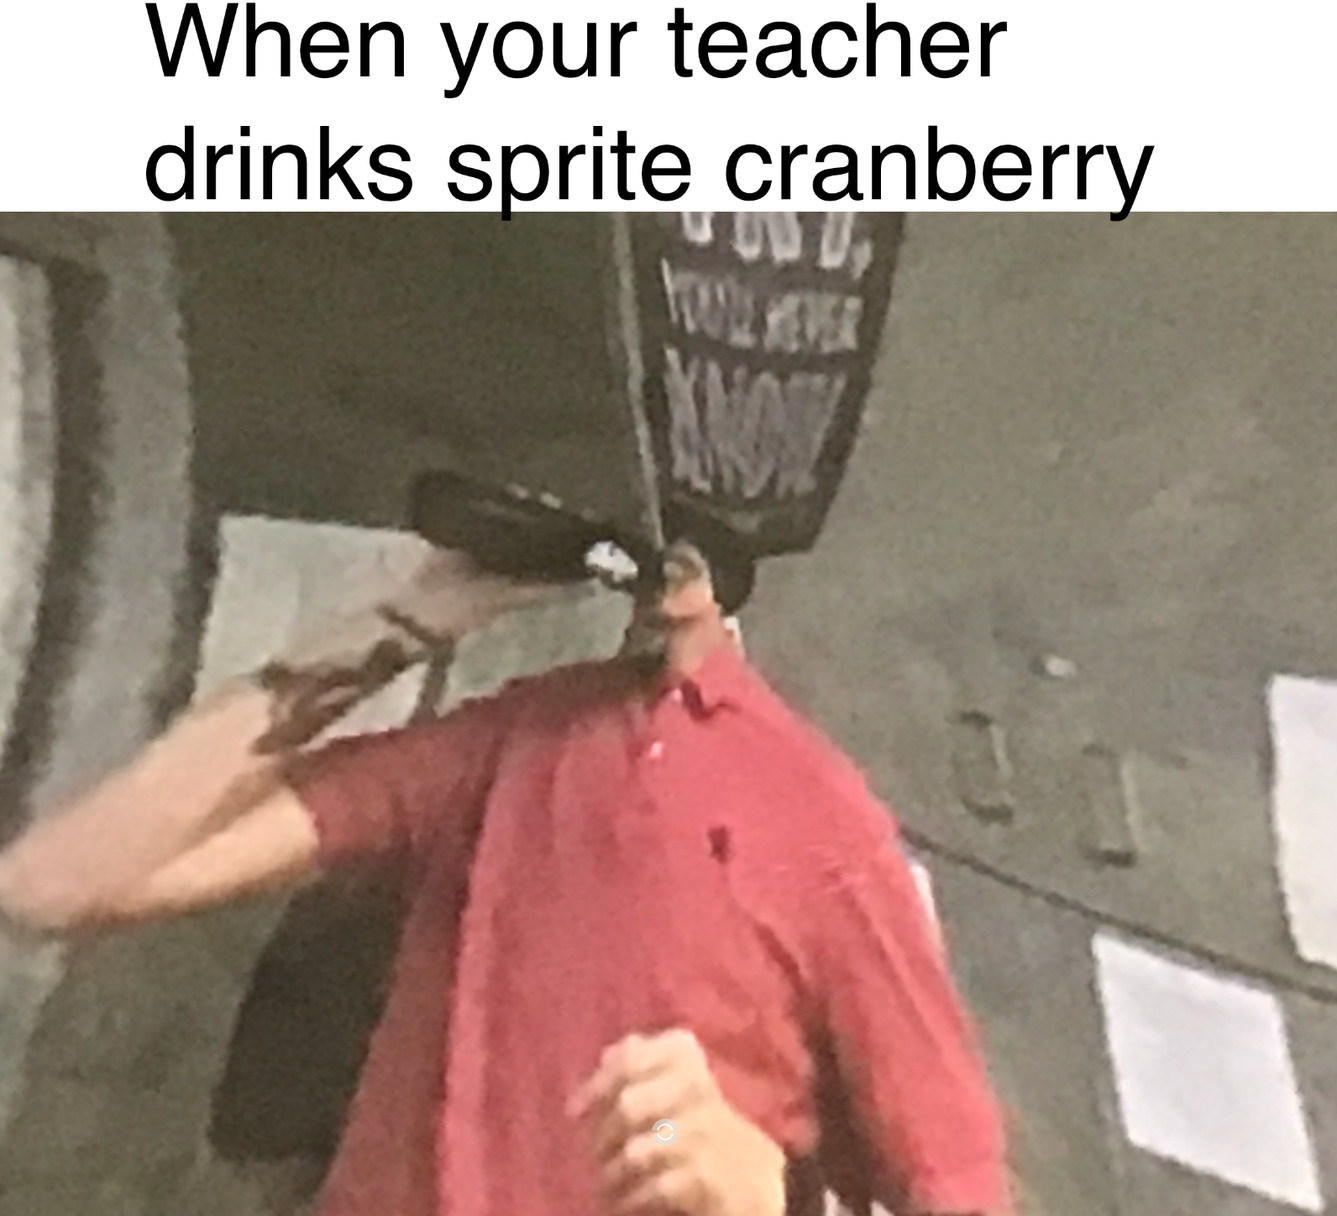 The Best Sprite Cranberry Memes Memedroid This includes impact font, image macros, reaction images, and some social media screenshots. the best sprite cranberry memes